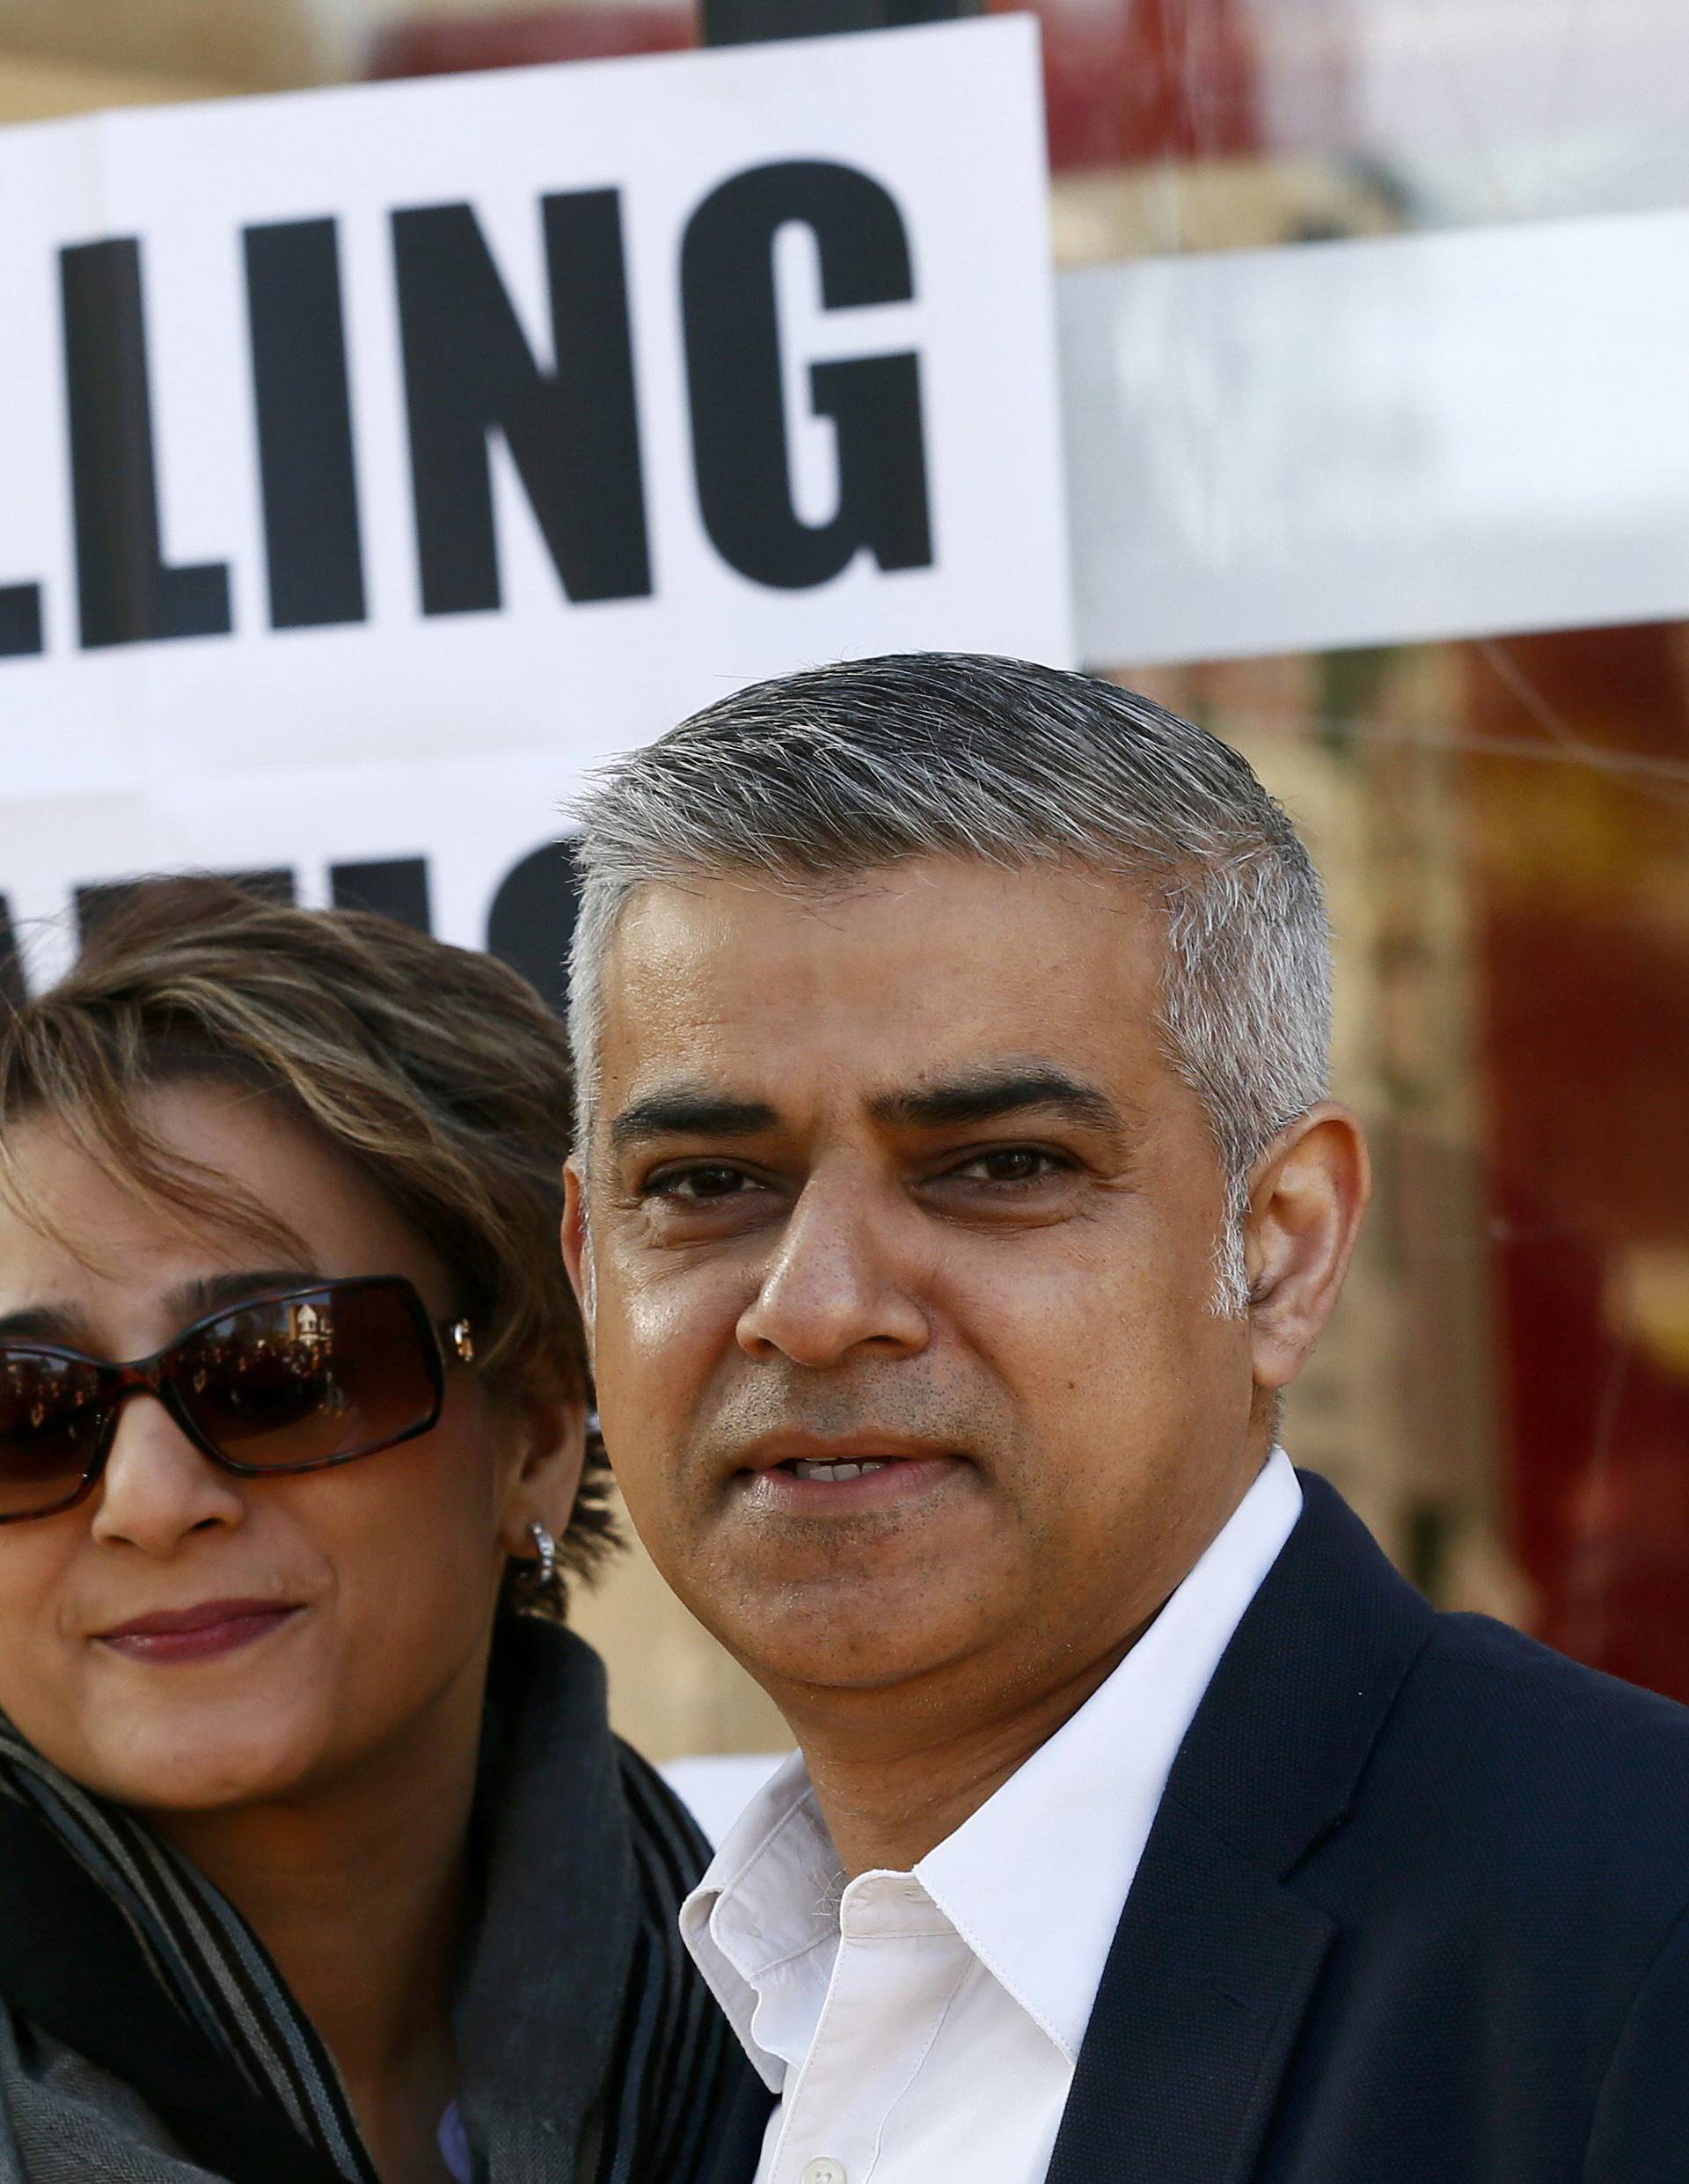 Khan,Britain's Labour Party candidate for Mayor of London and his wife Saadiya pose for photographers after casting their votes for the London mayoral elections